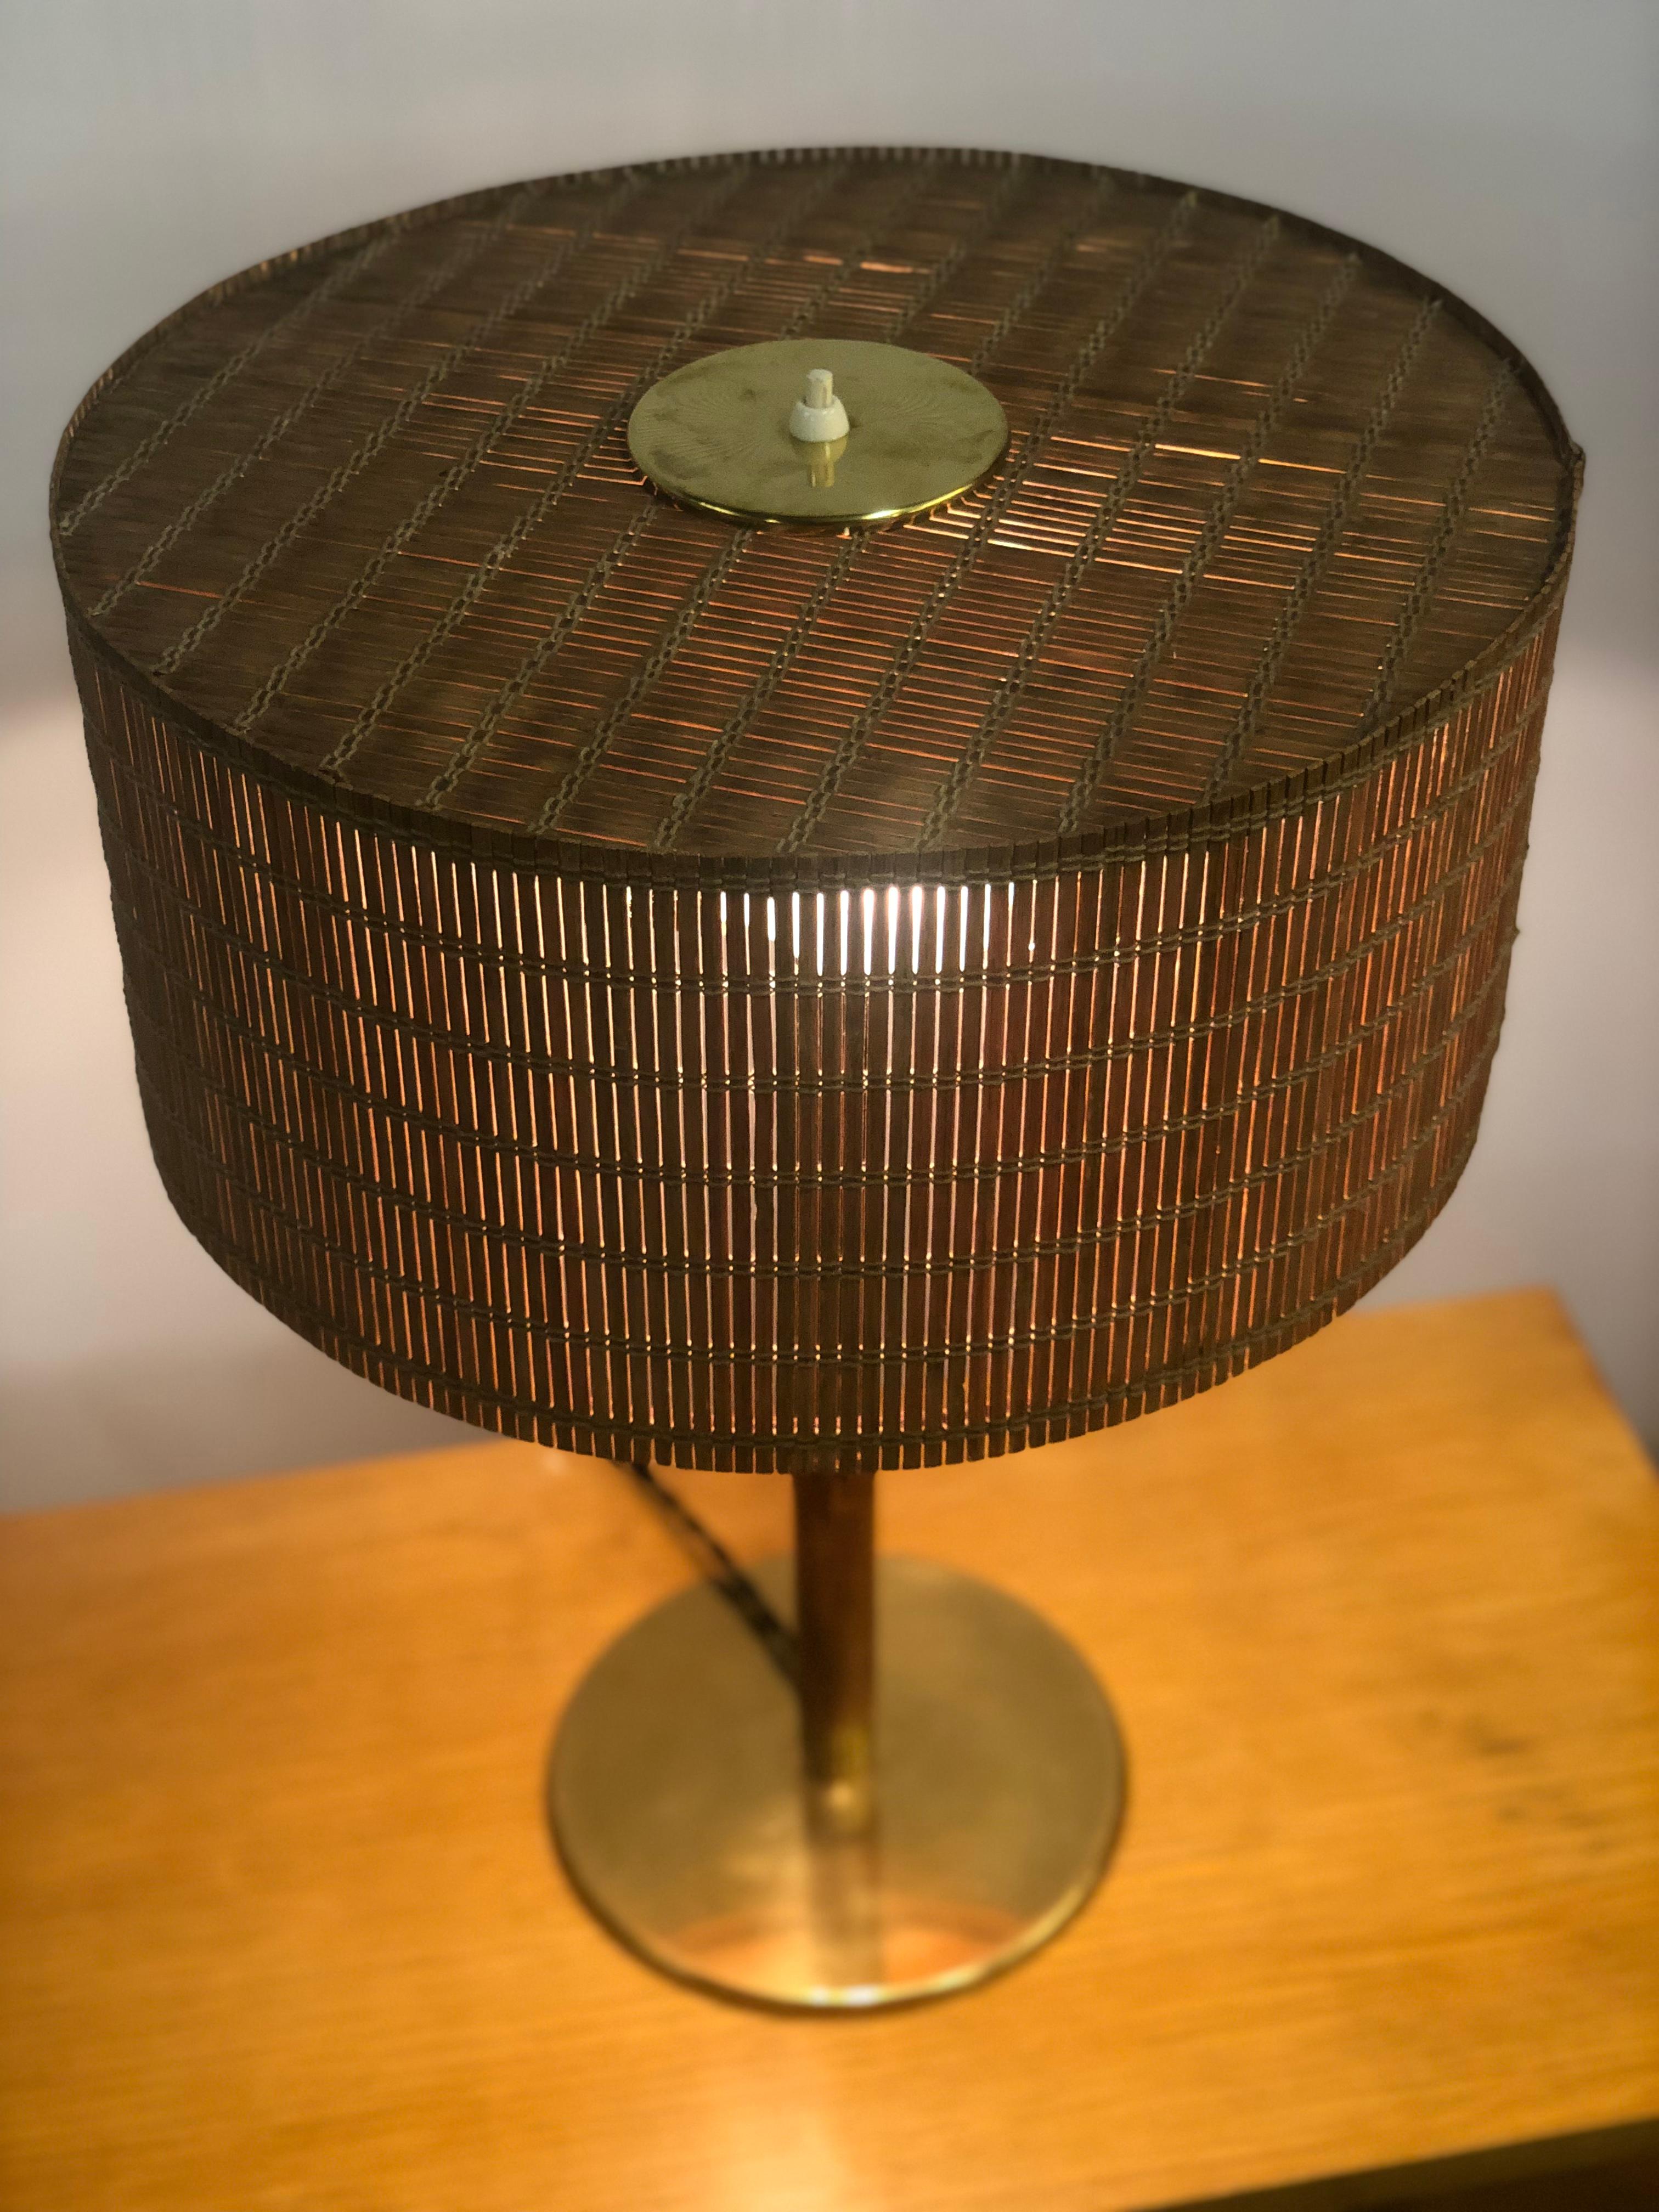 Scandinavian Modern Paavo Tynell Table Lamp Model 5068, Taito  For Sale